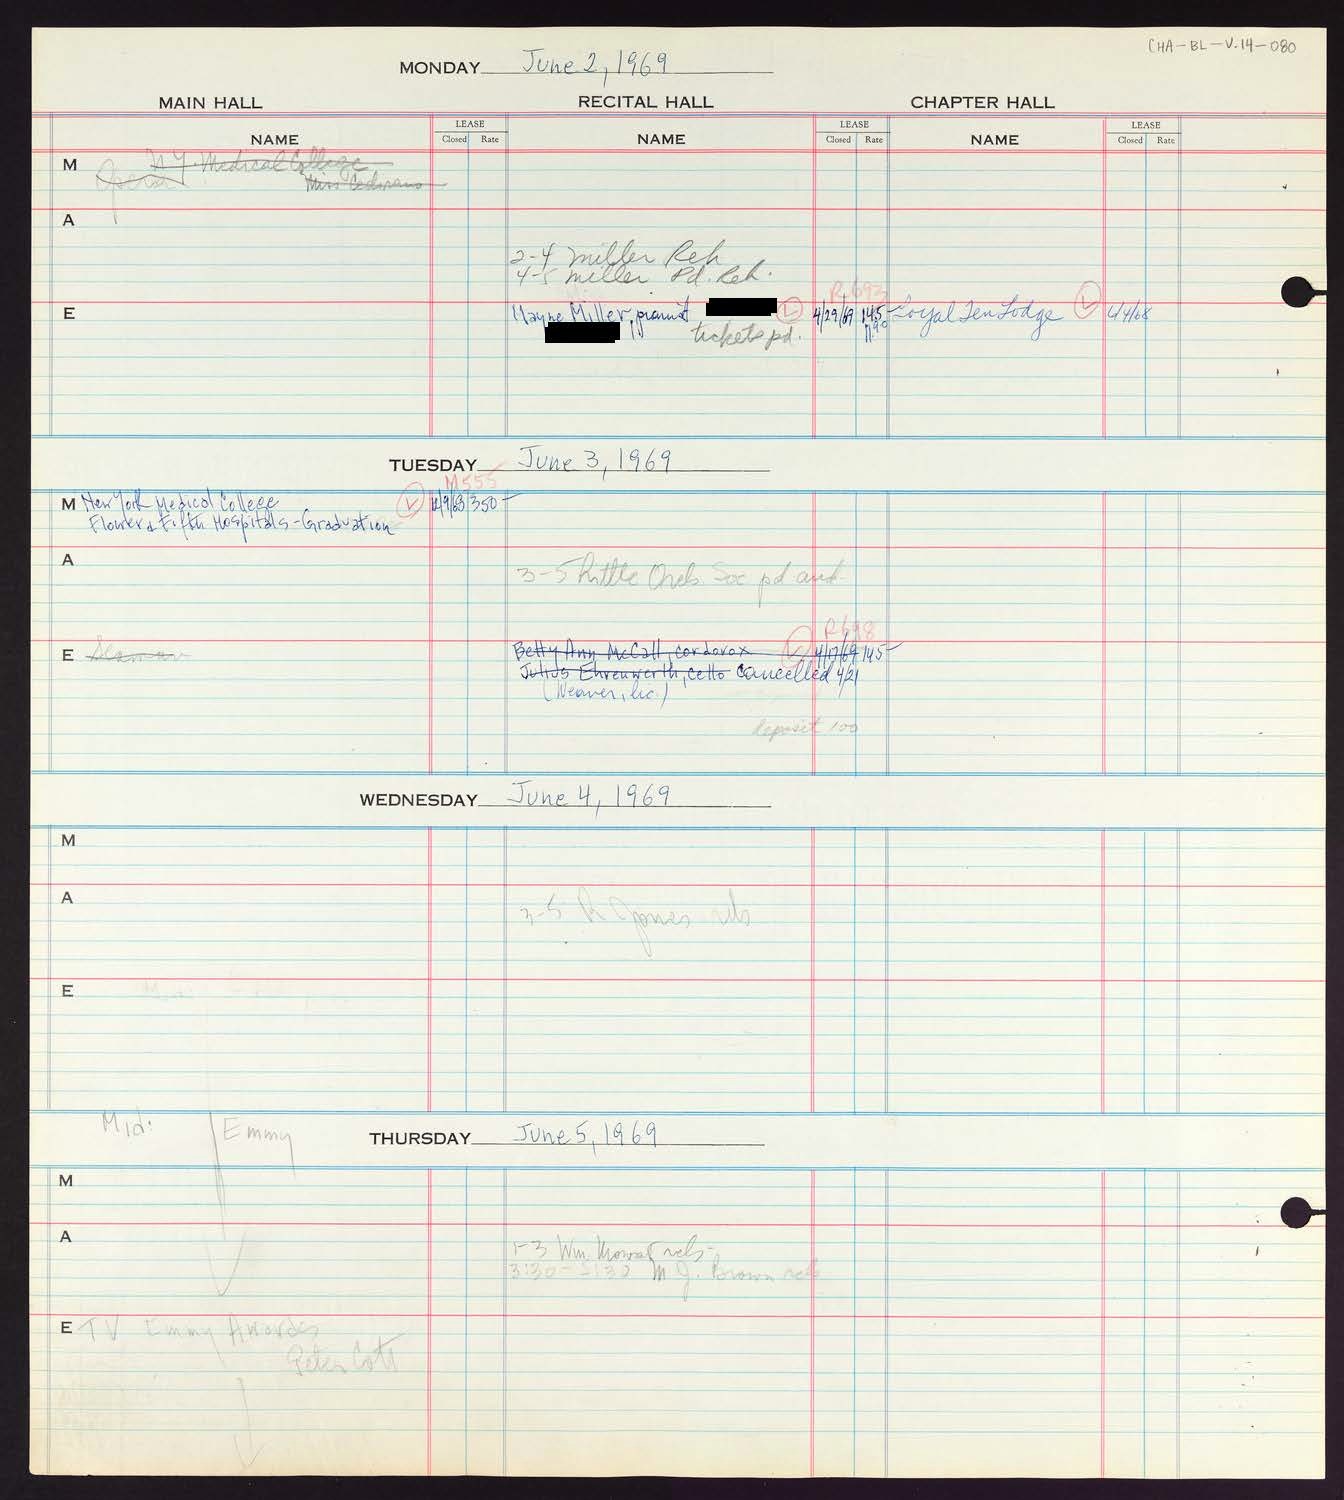 Carnegie Hall Booking Ledger, volume 14, page 80